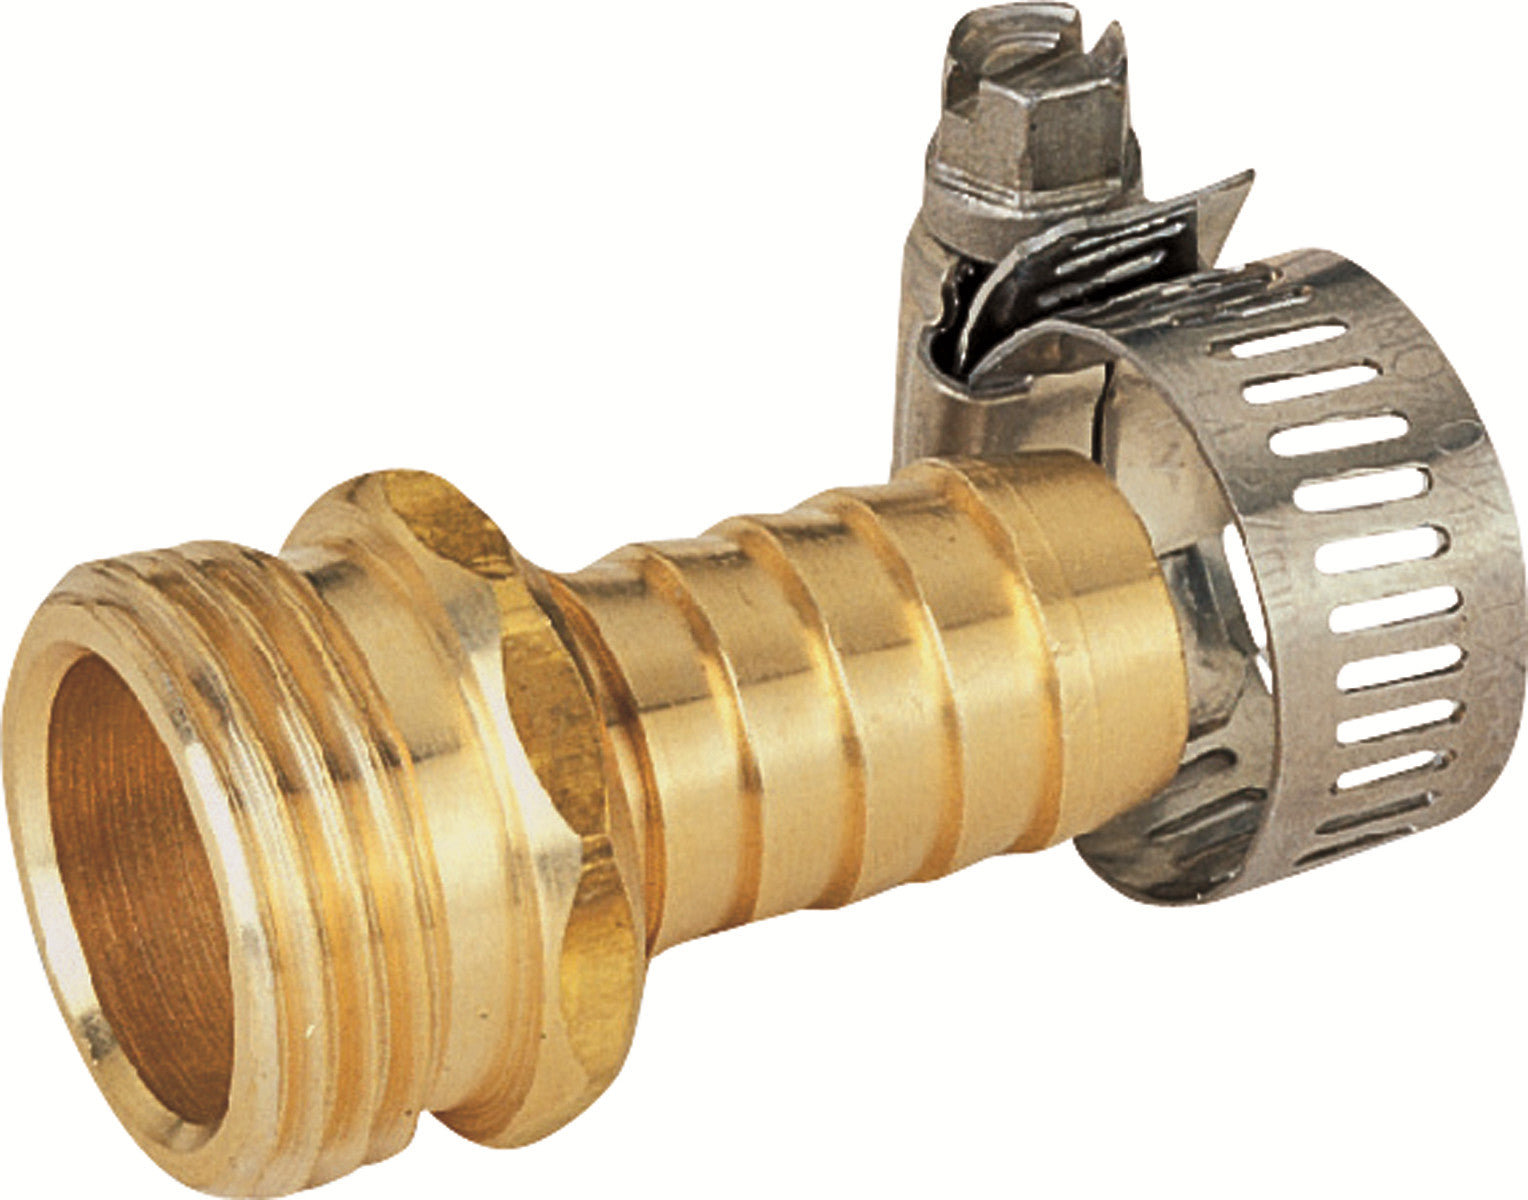 Landscapers Select Brass 5/8" Male Hose End Repair